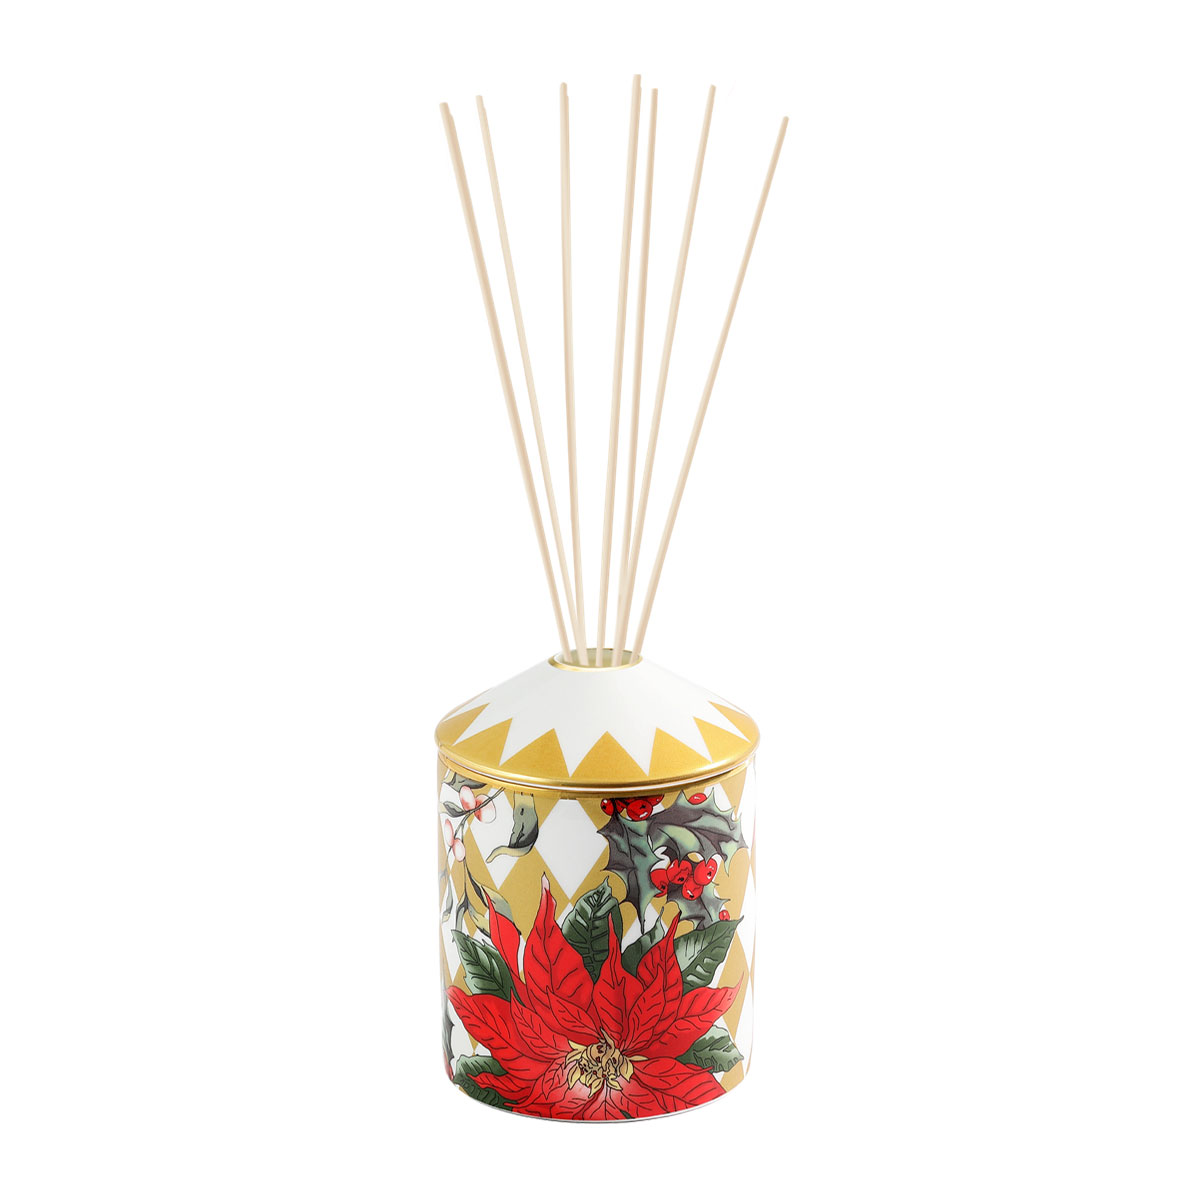 Halcyon Days Parterre Gold with Poinsettia Cinnamon and Orange Reed Diffuser